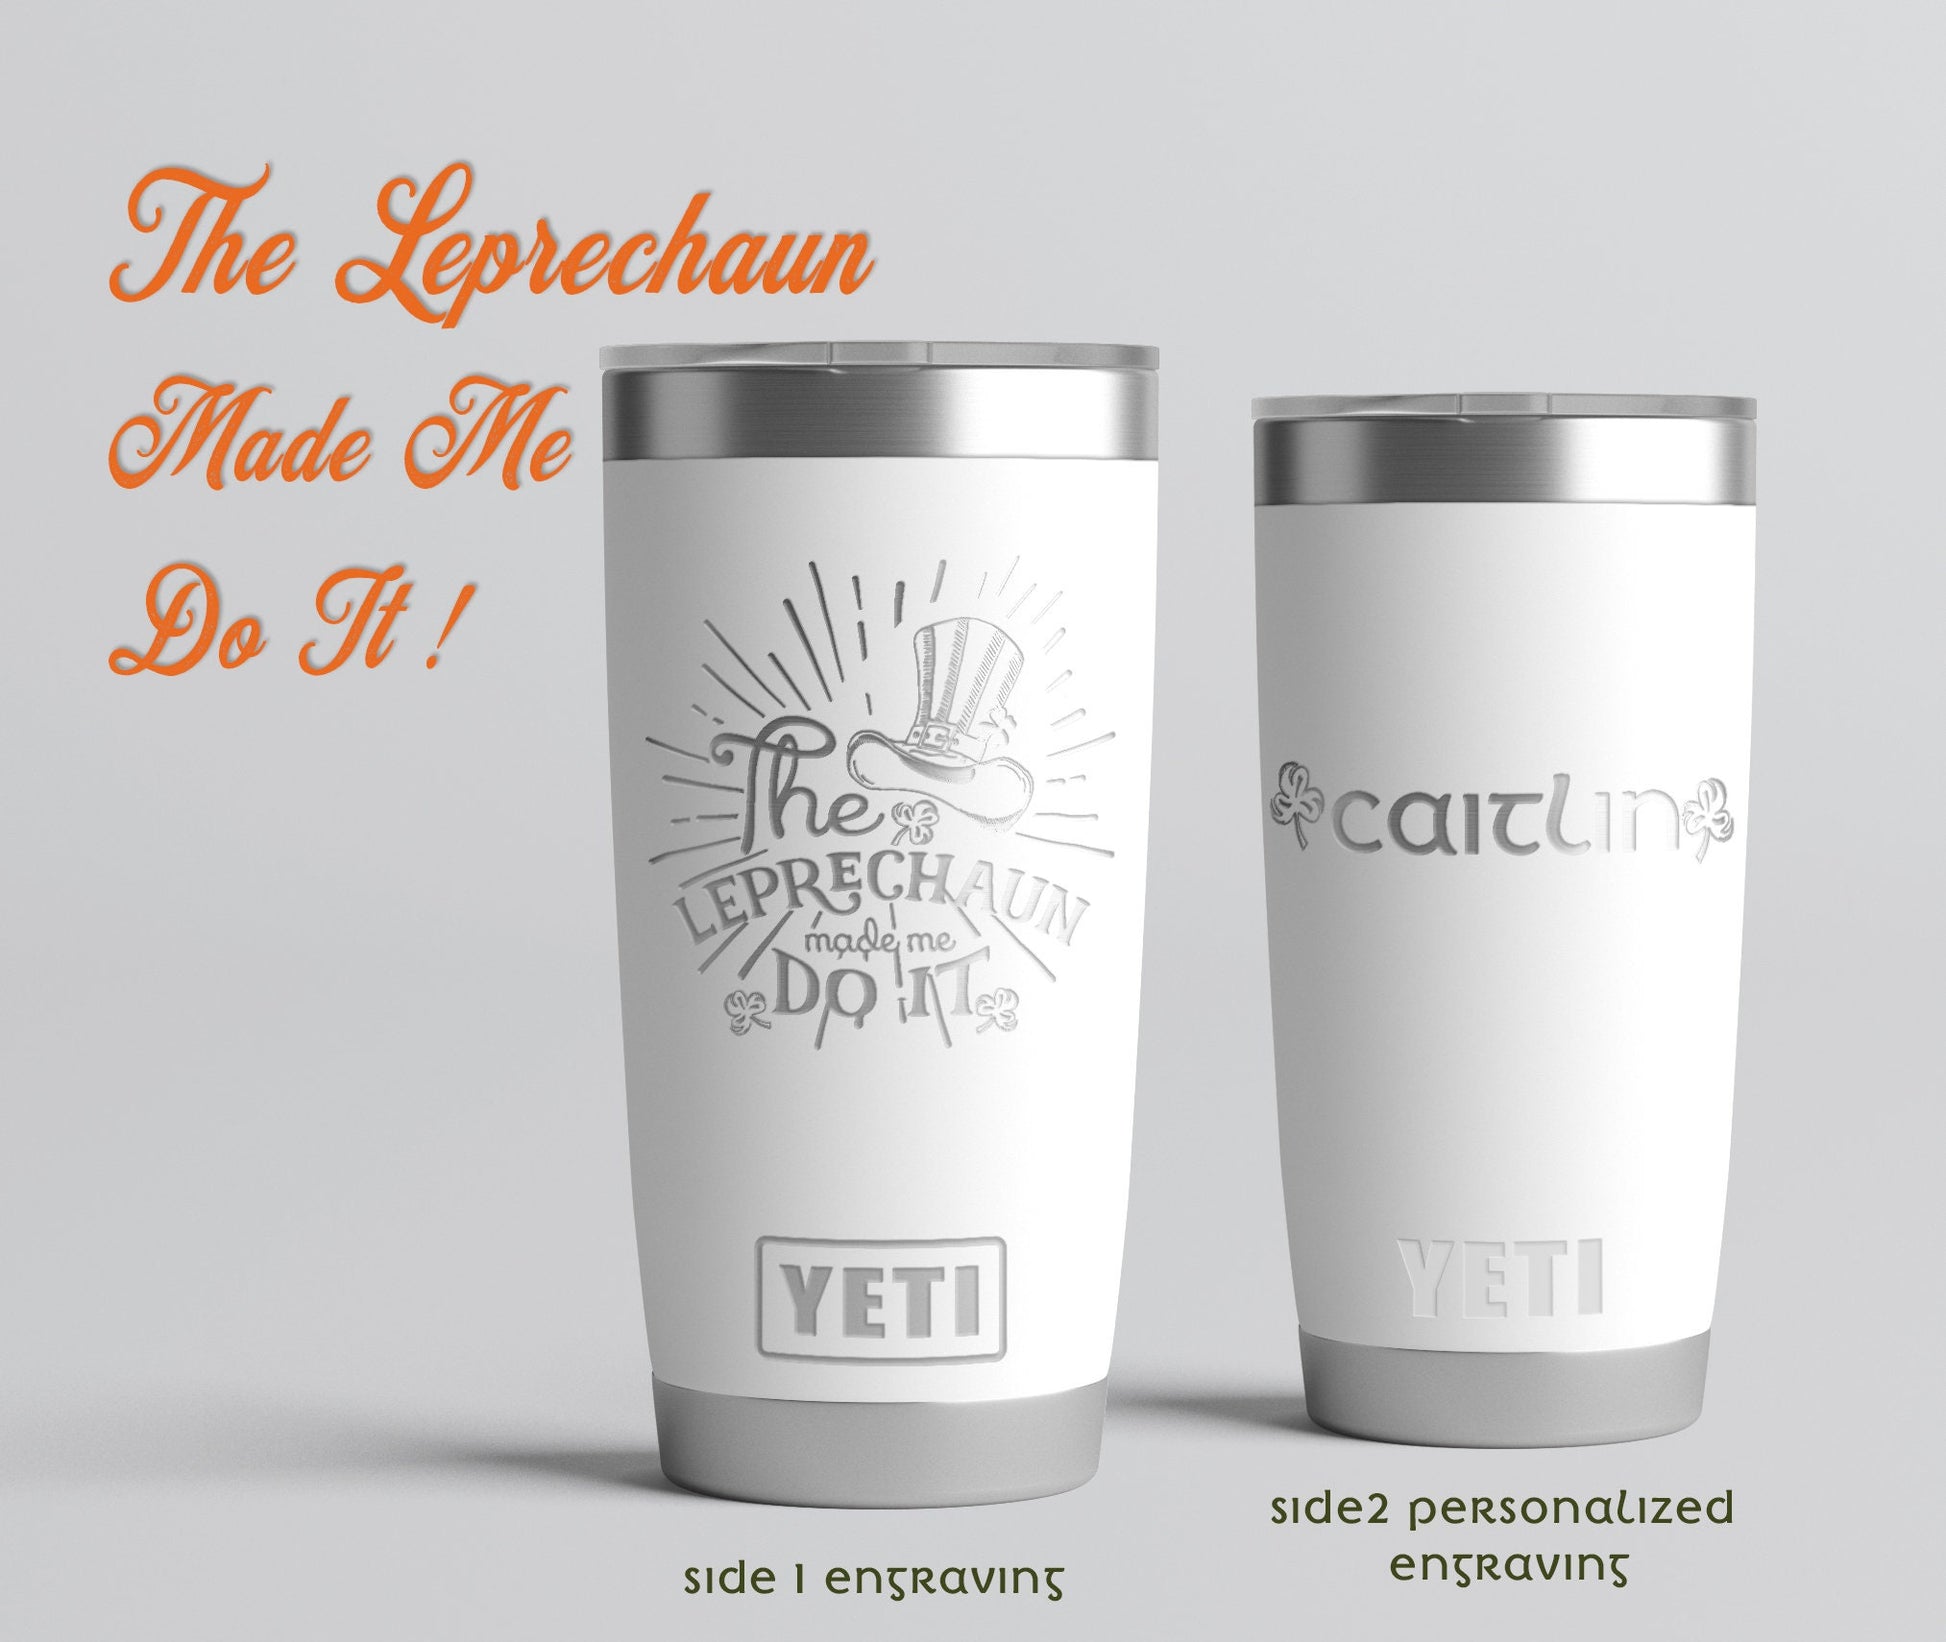 Personalized Yeti Tumbler or Polar Camel Brand, Fathers Day Gift